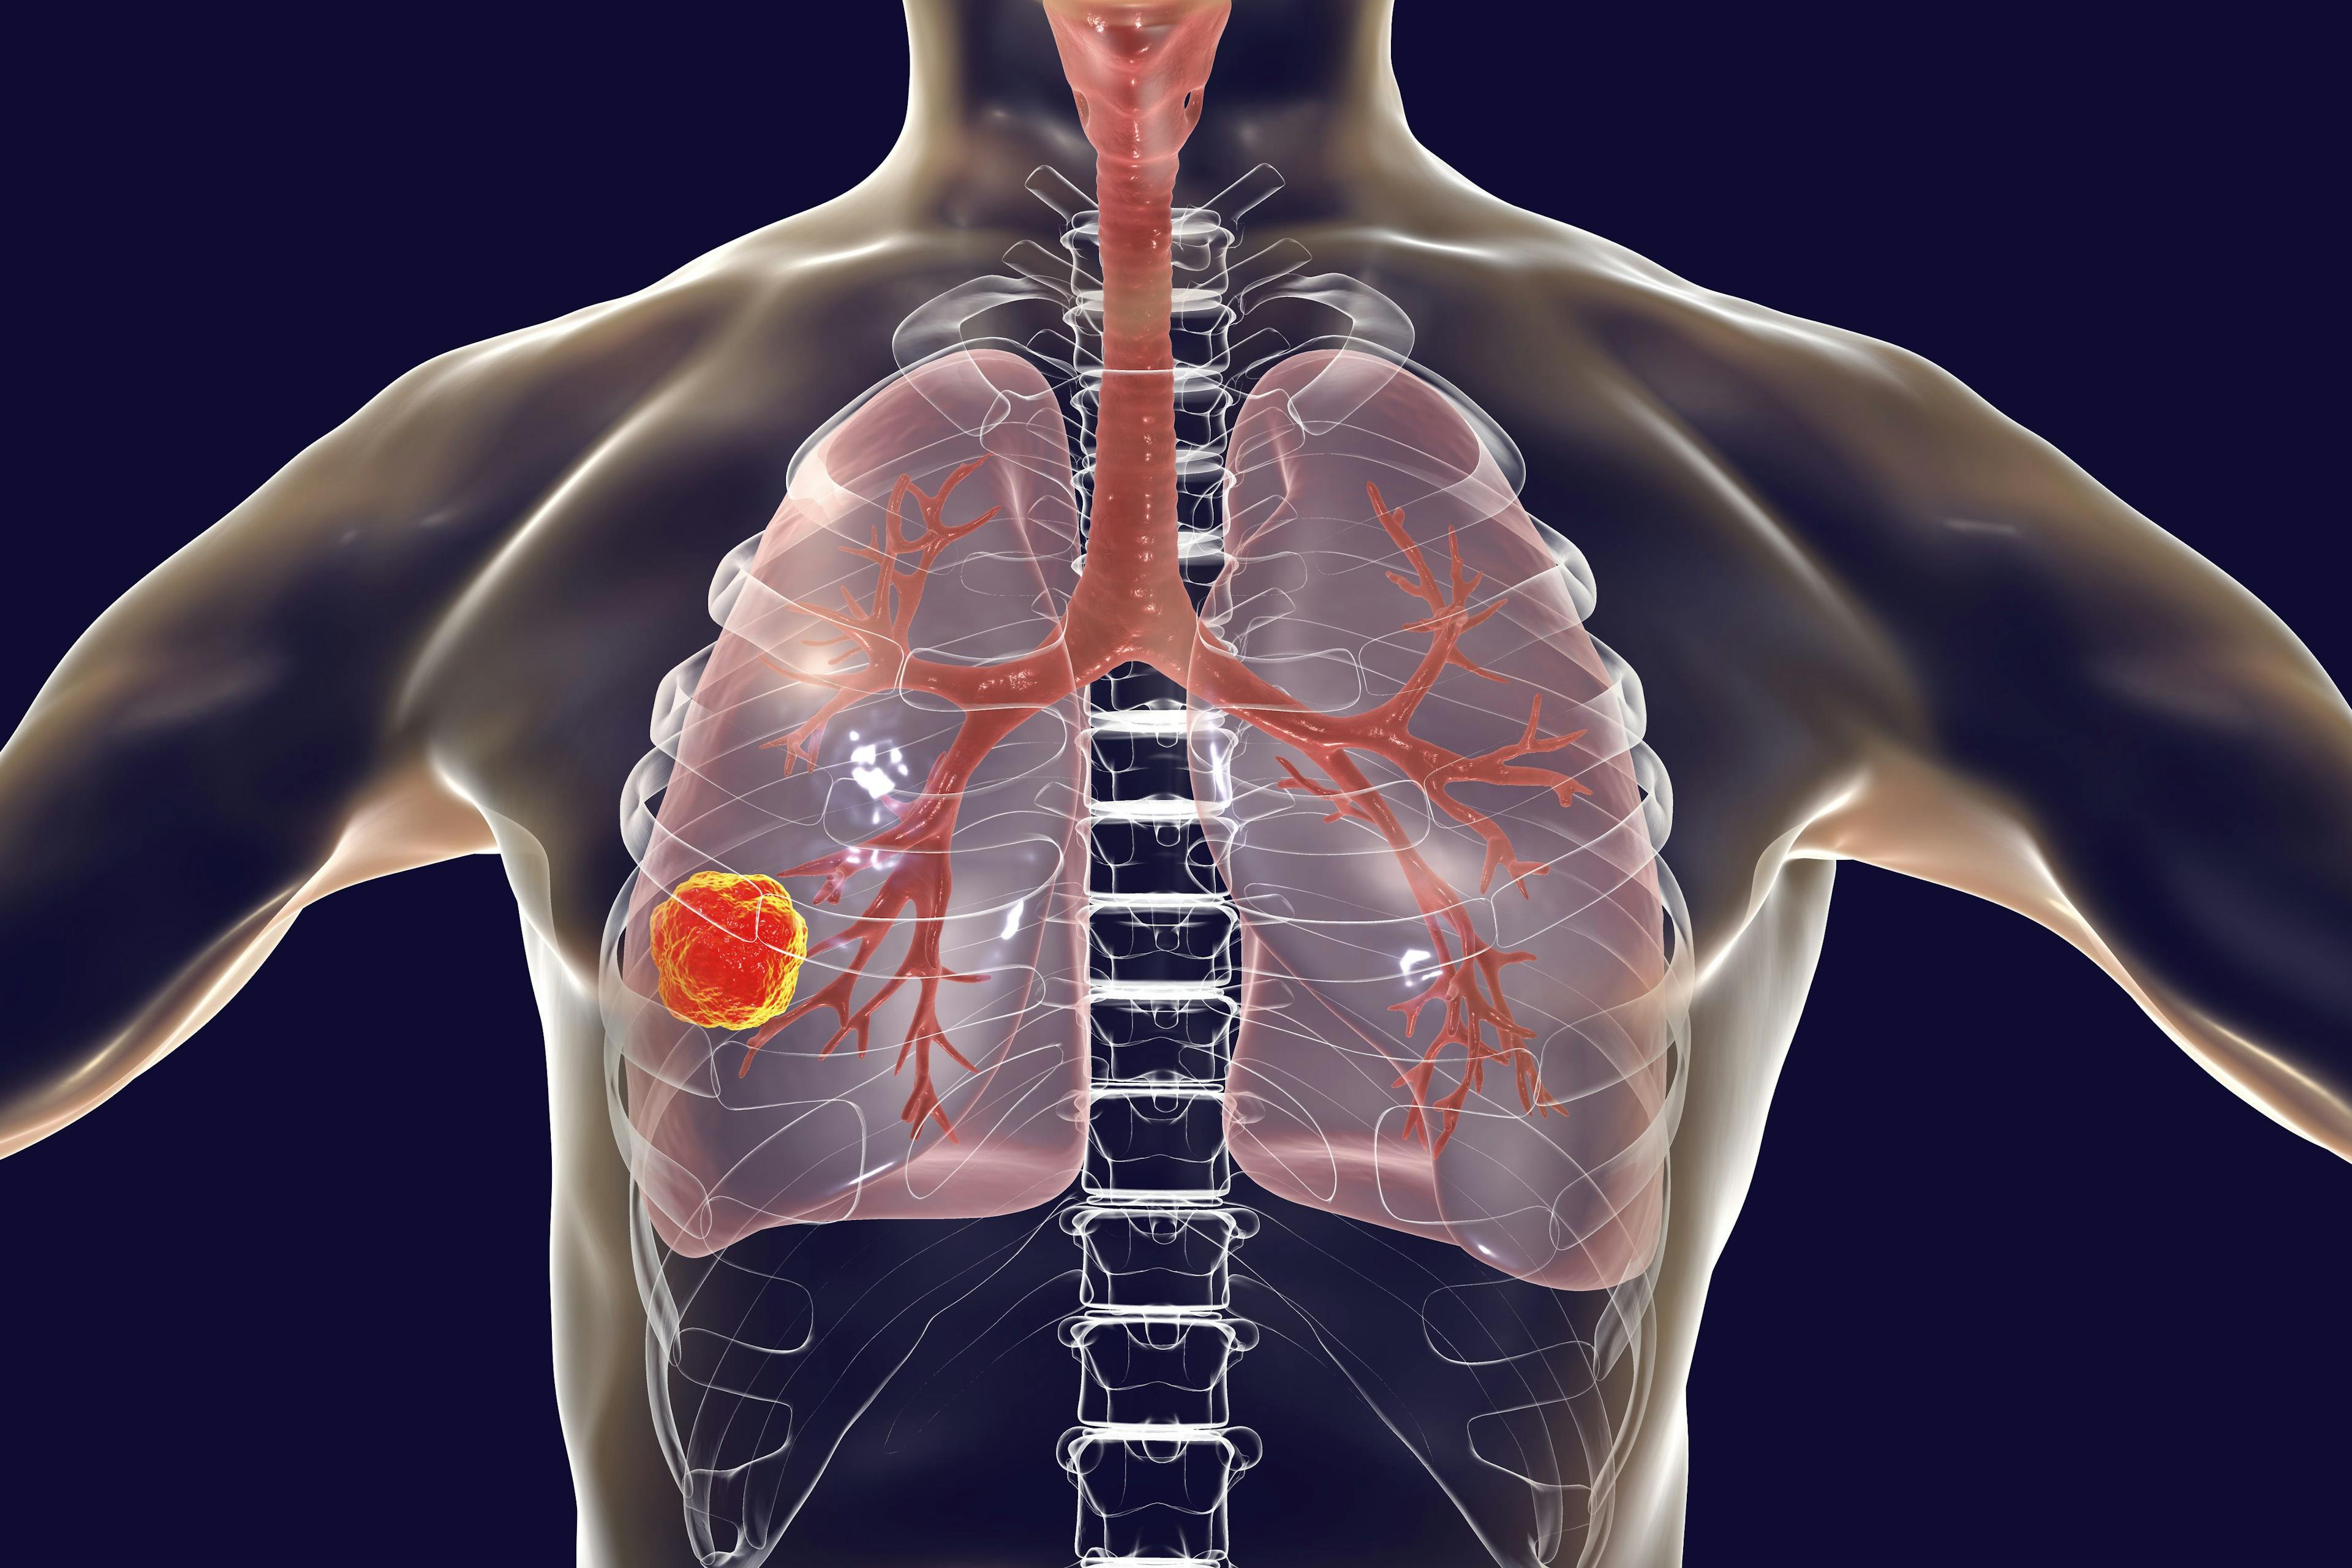 Illustration of a tumor in a human lung